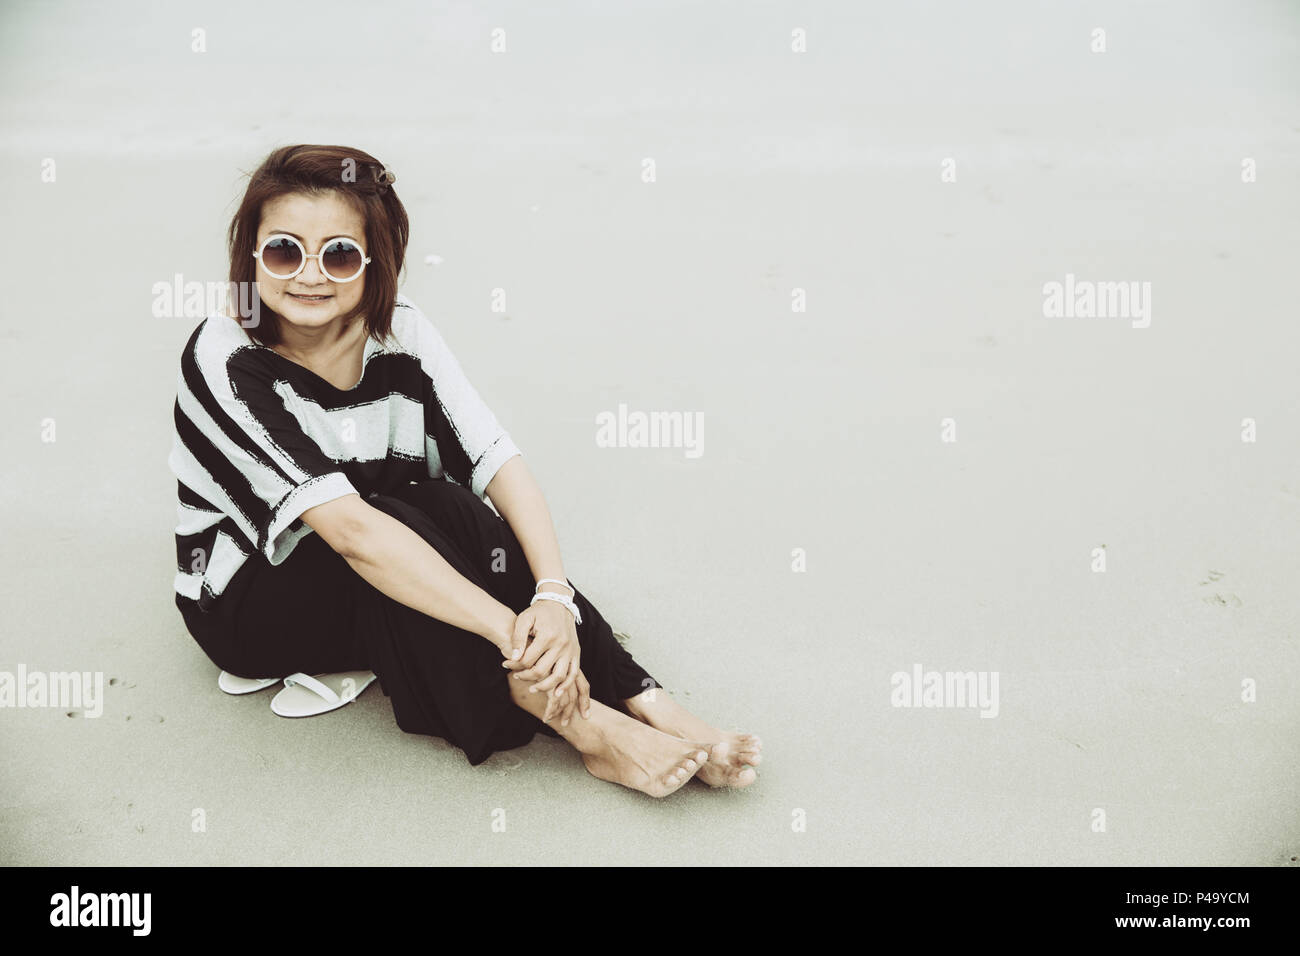 portrait asian single hipster indy women wear sunglasses lonely siting alone on the beach vintage mute color tone. Stock Photo